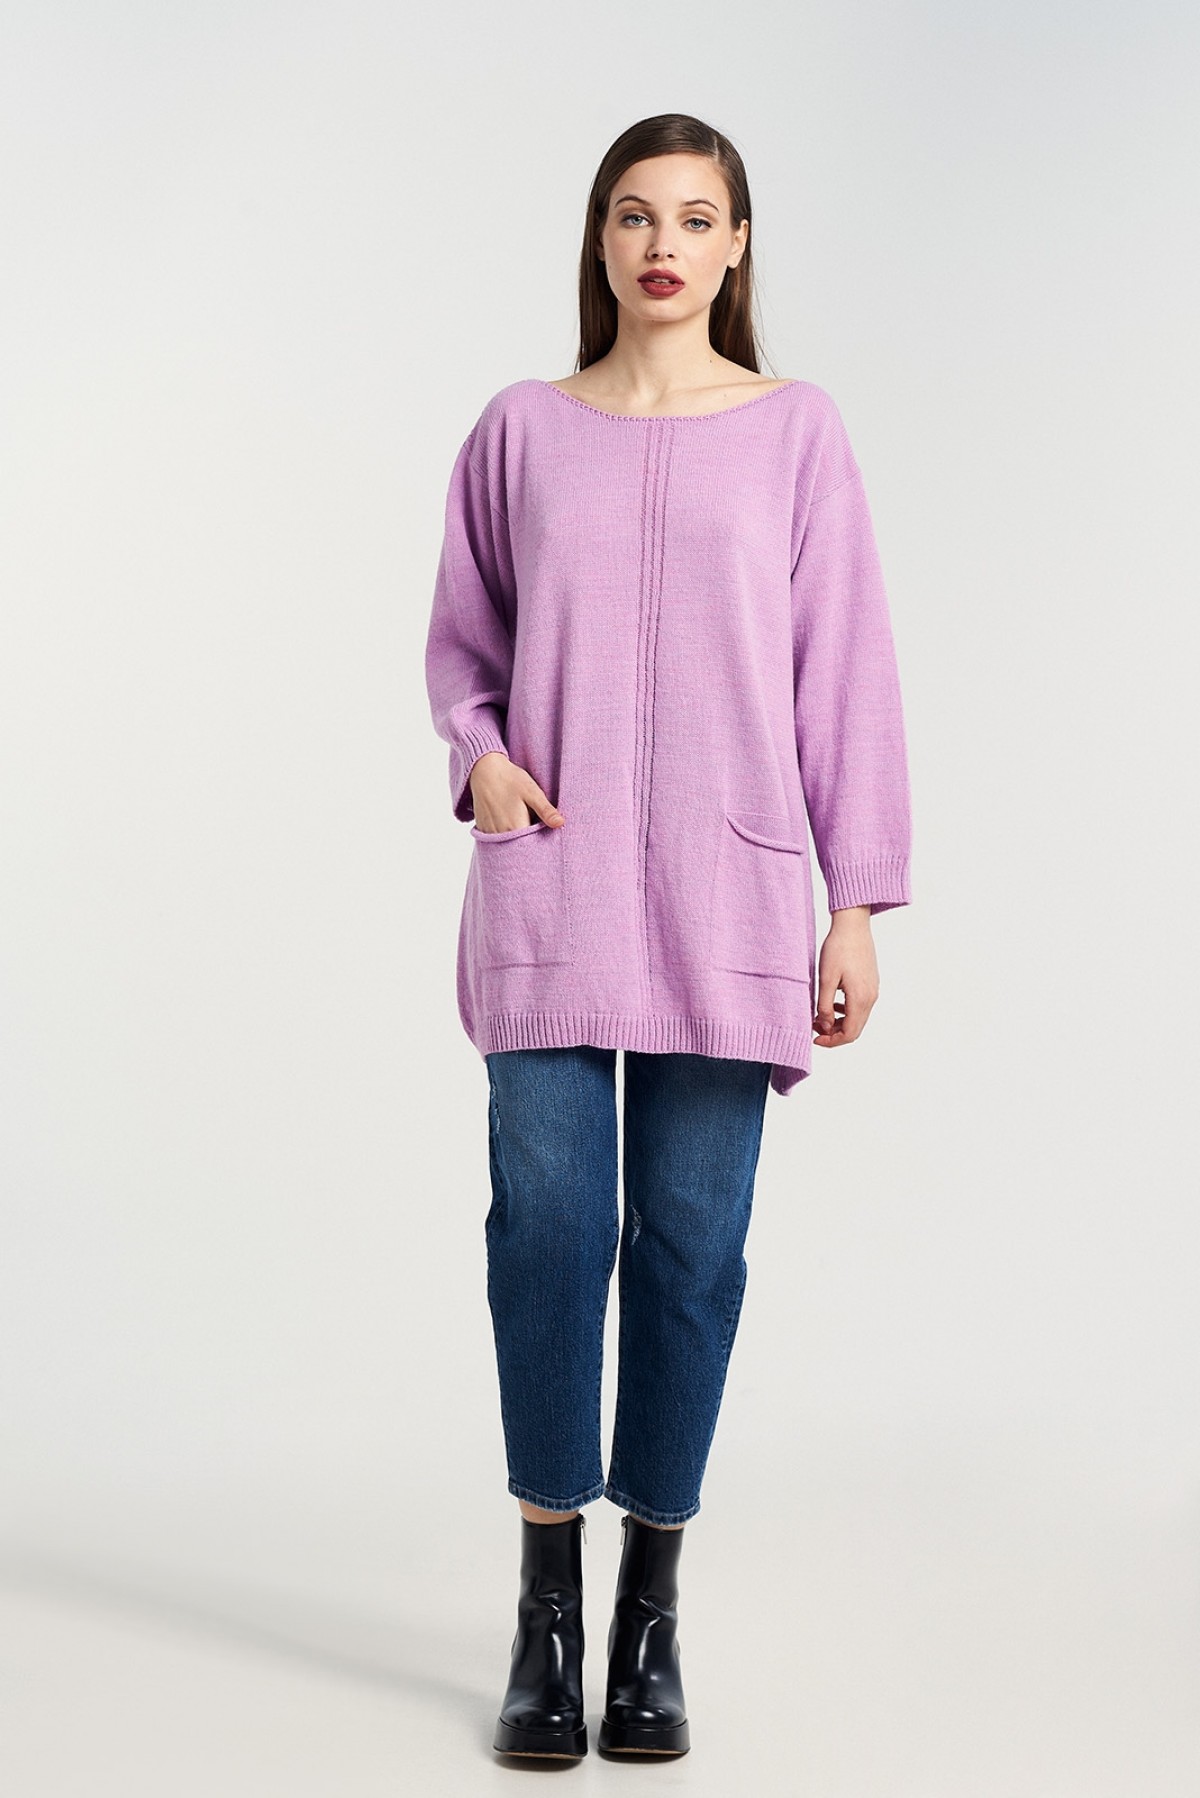 WOOL SWEATER WITH POCKETS IN LAVENDER